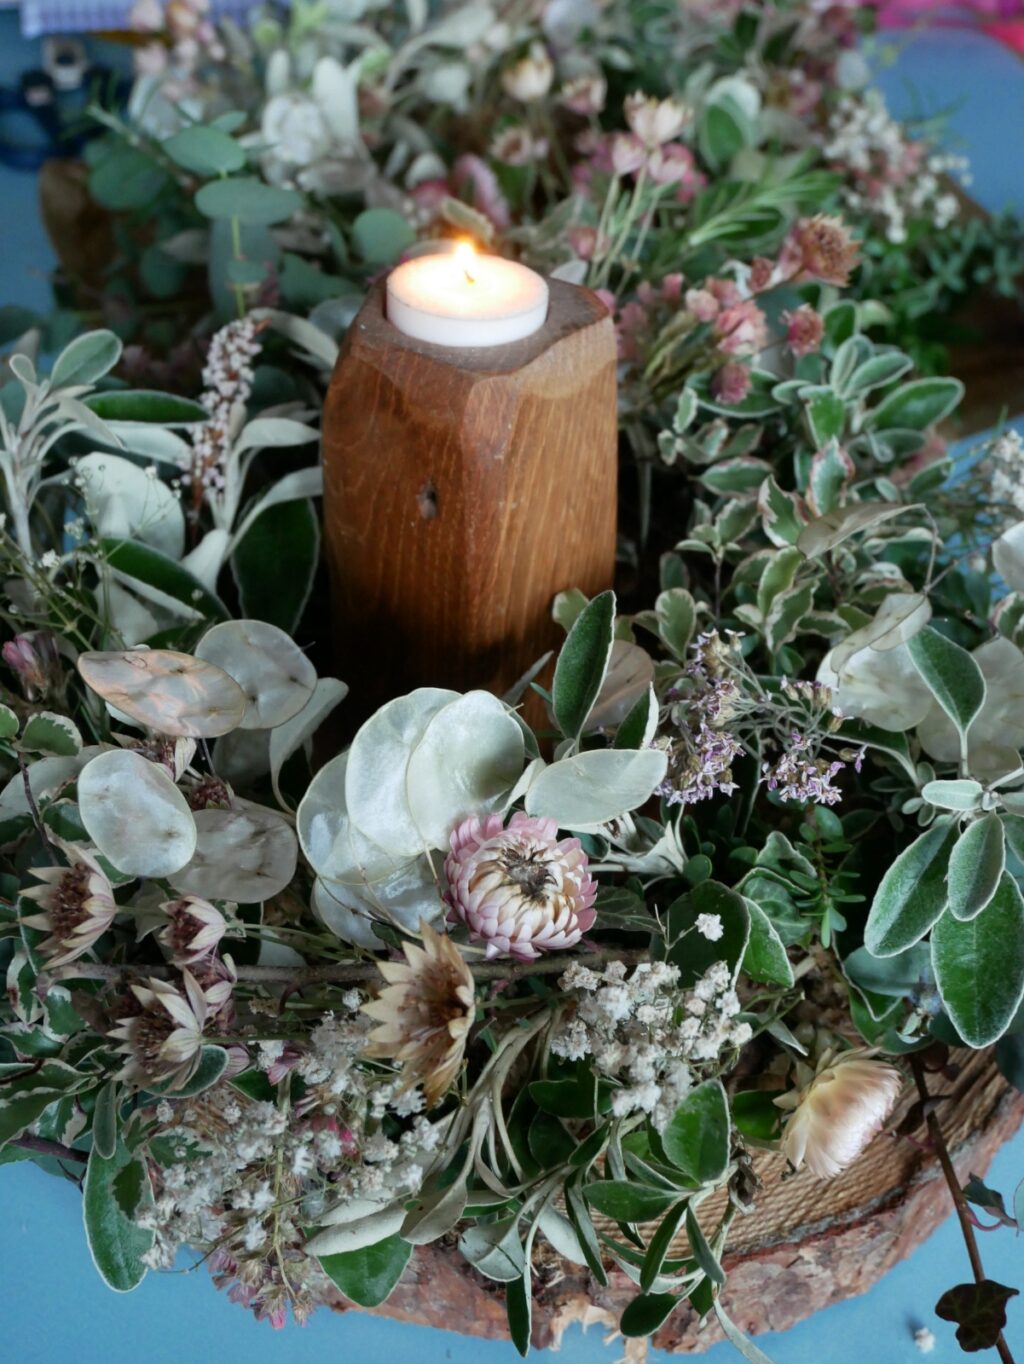 A wedding flower centrepiece for winter with foliage and dried flowers. Clodhopper Blooms.